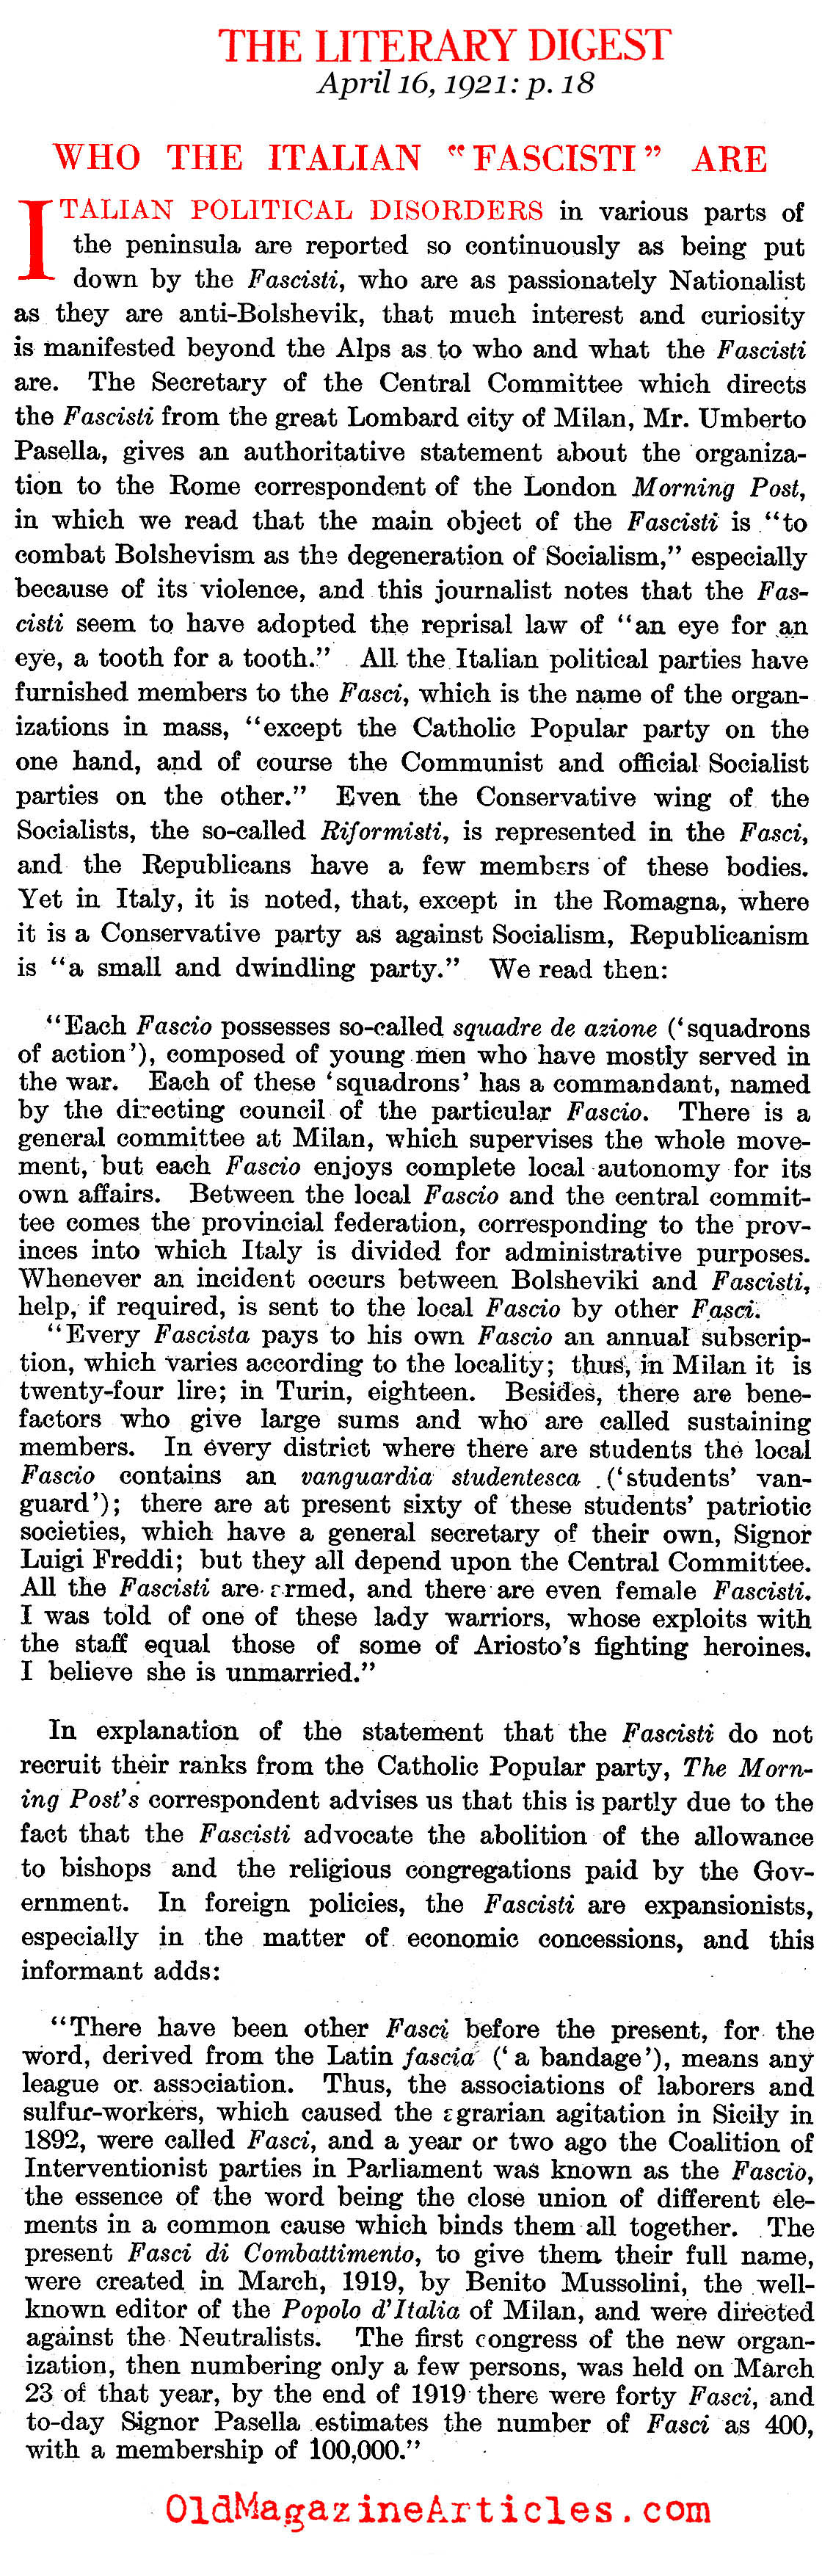 Who Are the Italian Fascists? (The Literary Digest, 1921)